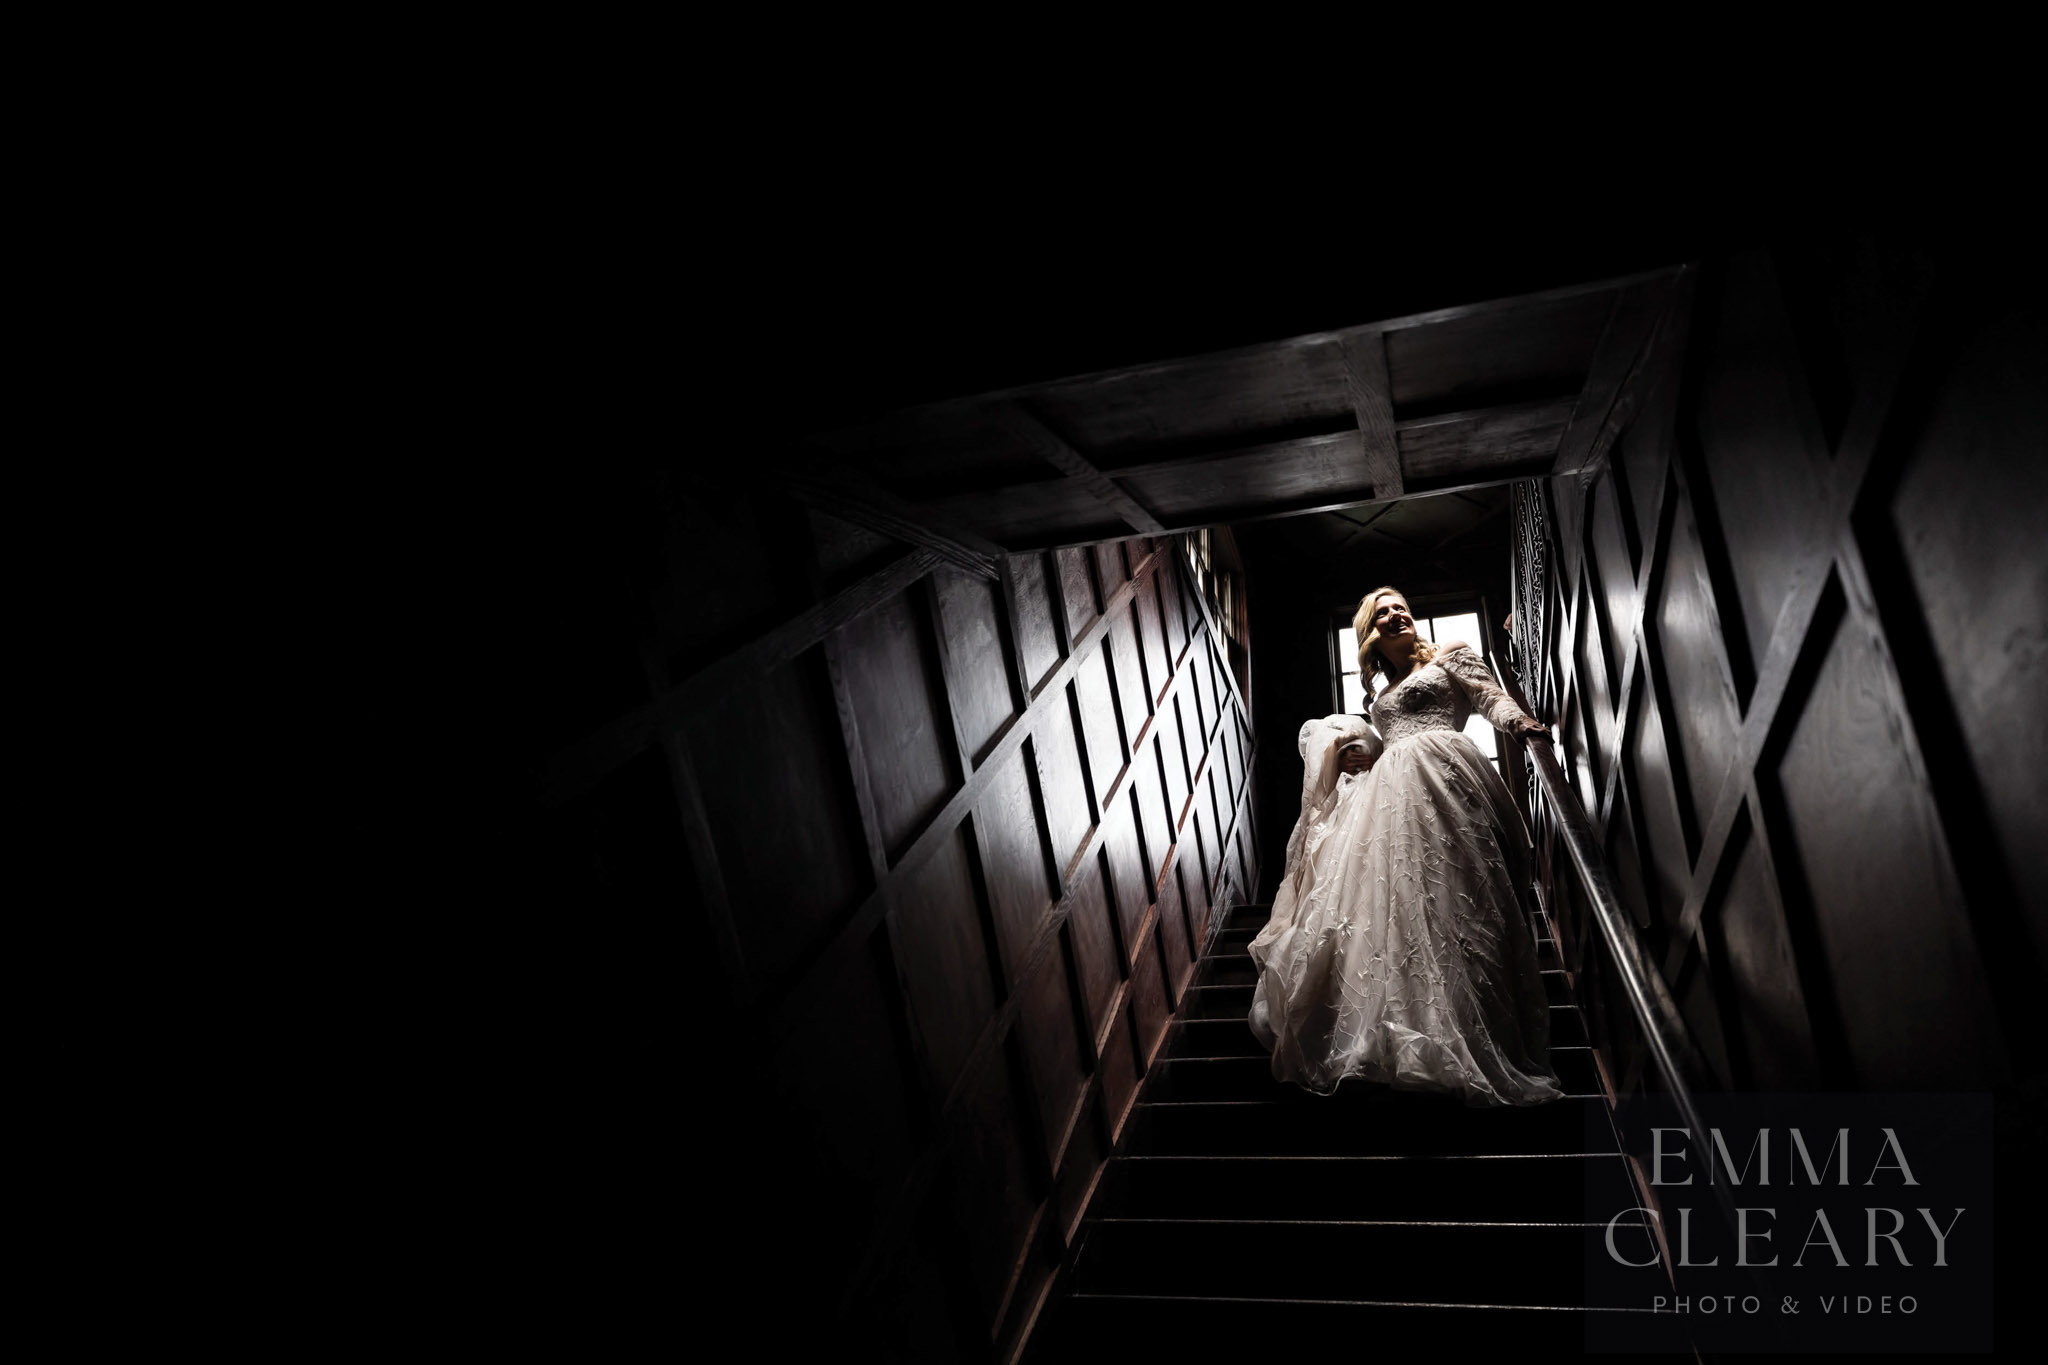 The bride comes down the stairs